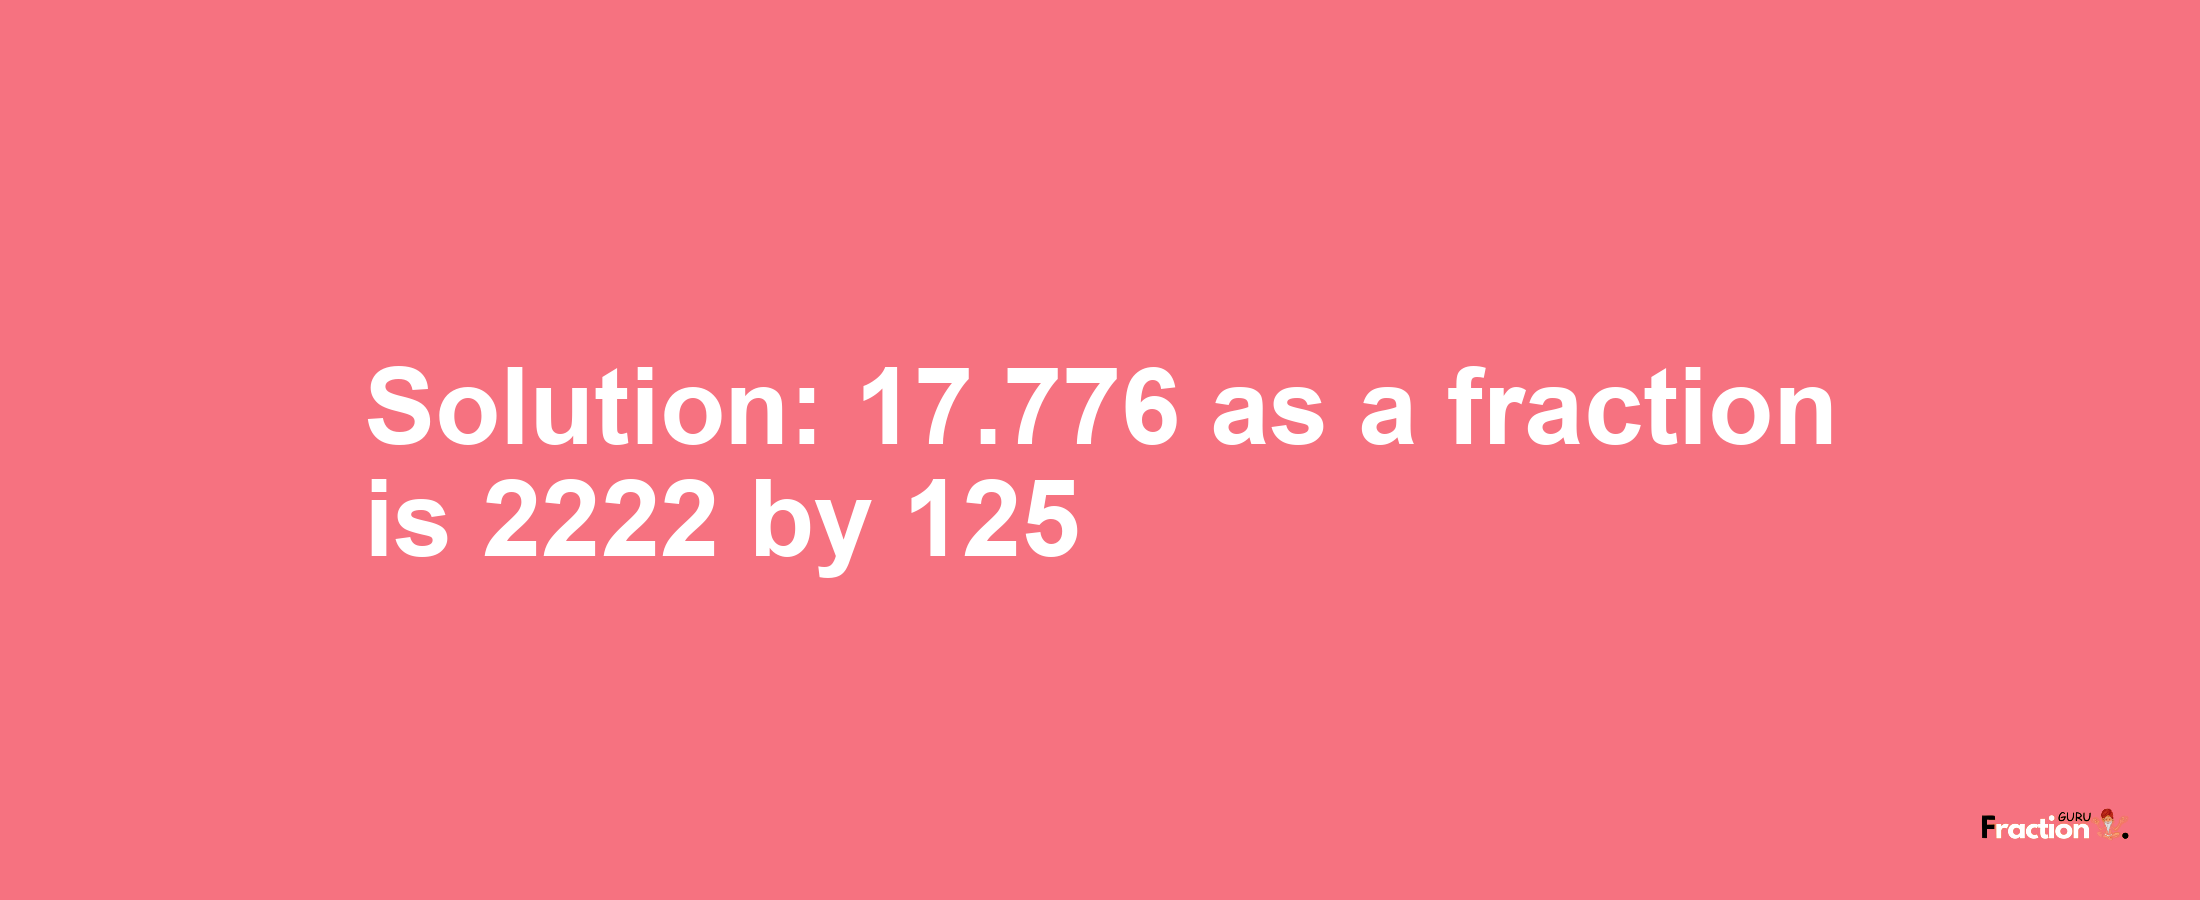 Solution:17.776 as a fraction is 2222/125